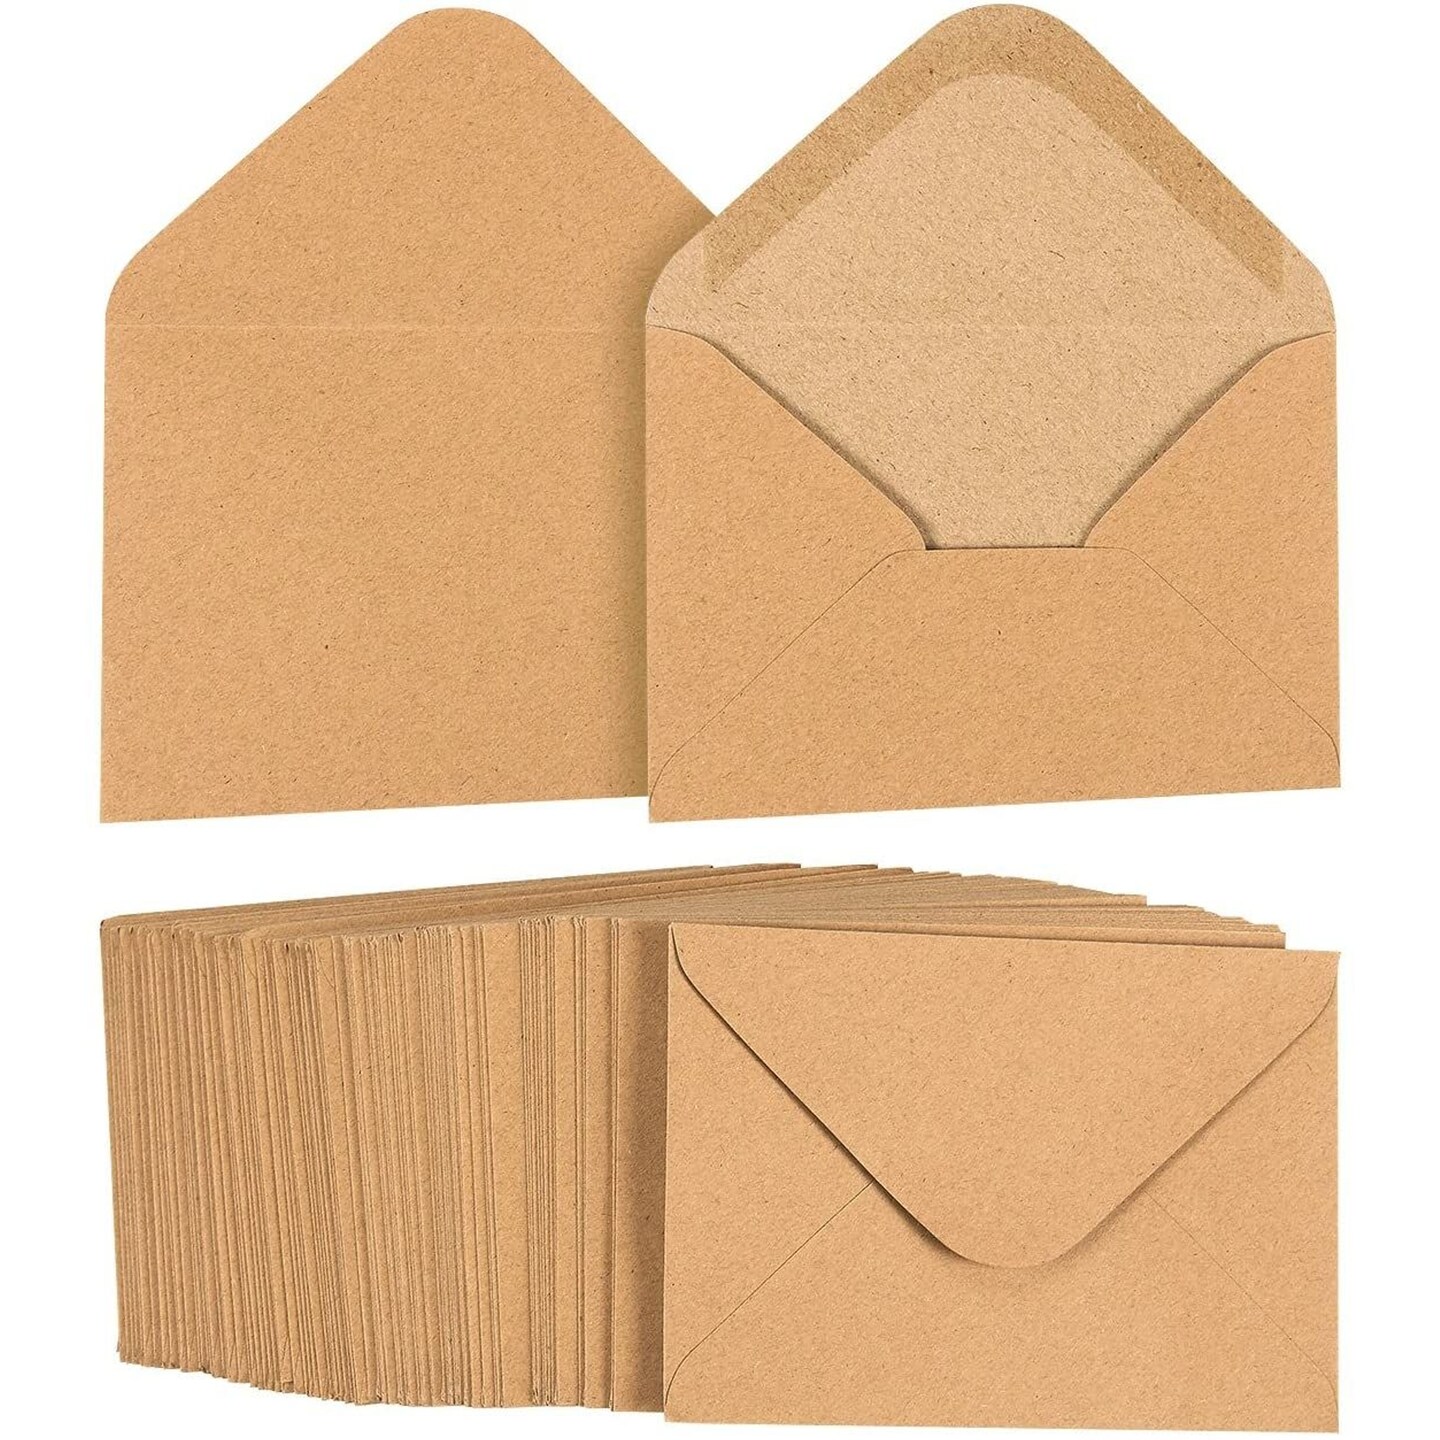 48 Pack Vintage Envelopes for Letters with 6 Decorative Old-Fashioned  Styles, Home Stationary Supplies (8.7